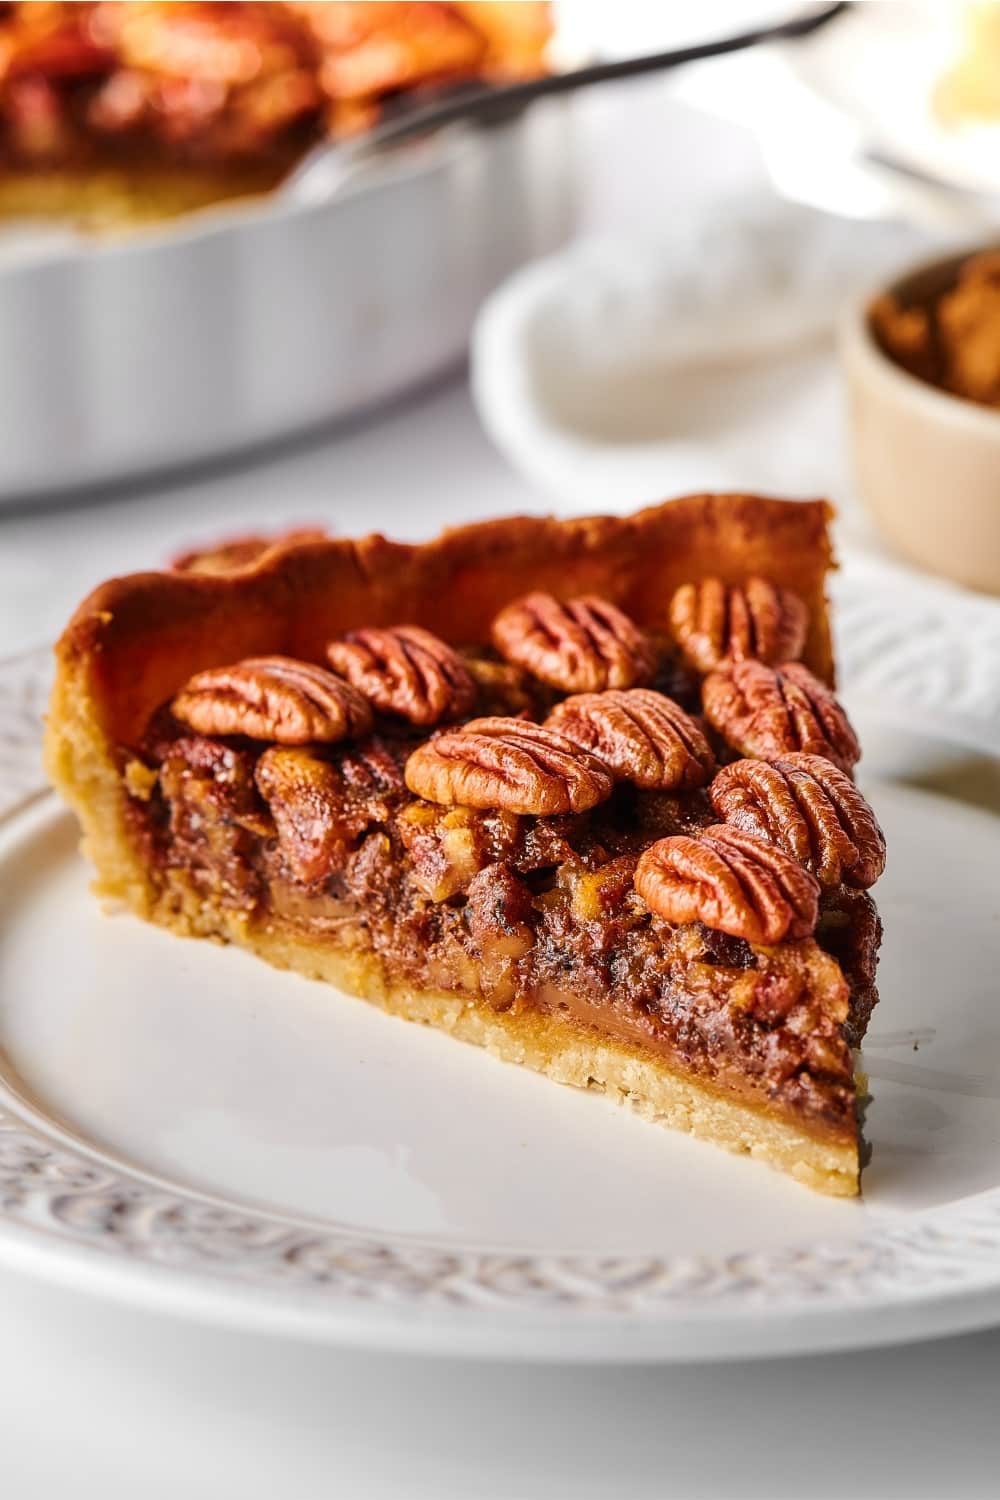 Hey slice of pecan pie on a white plate.